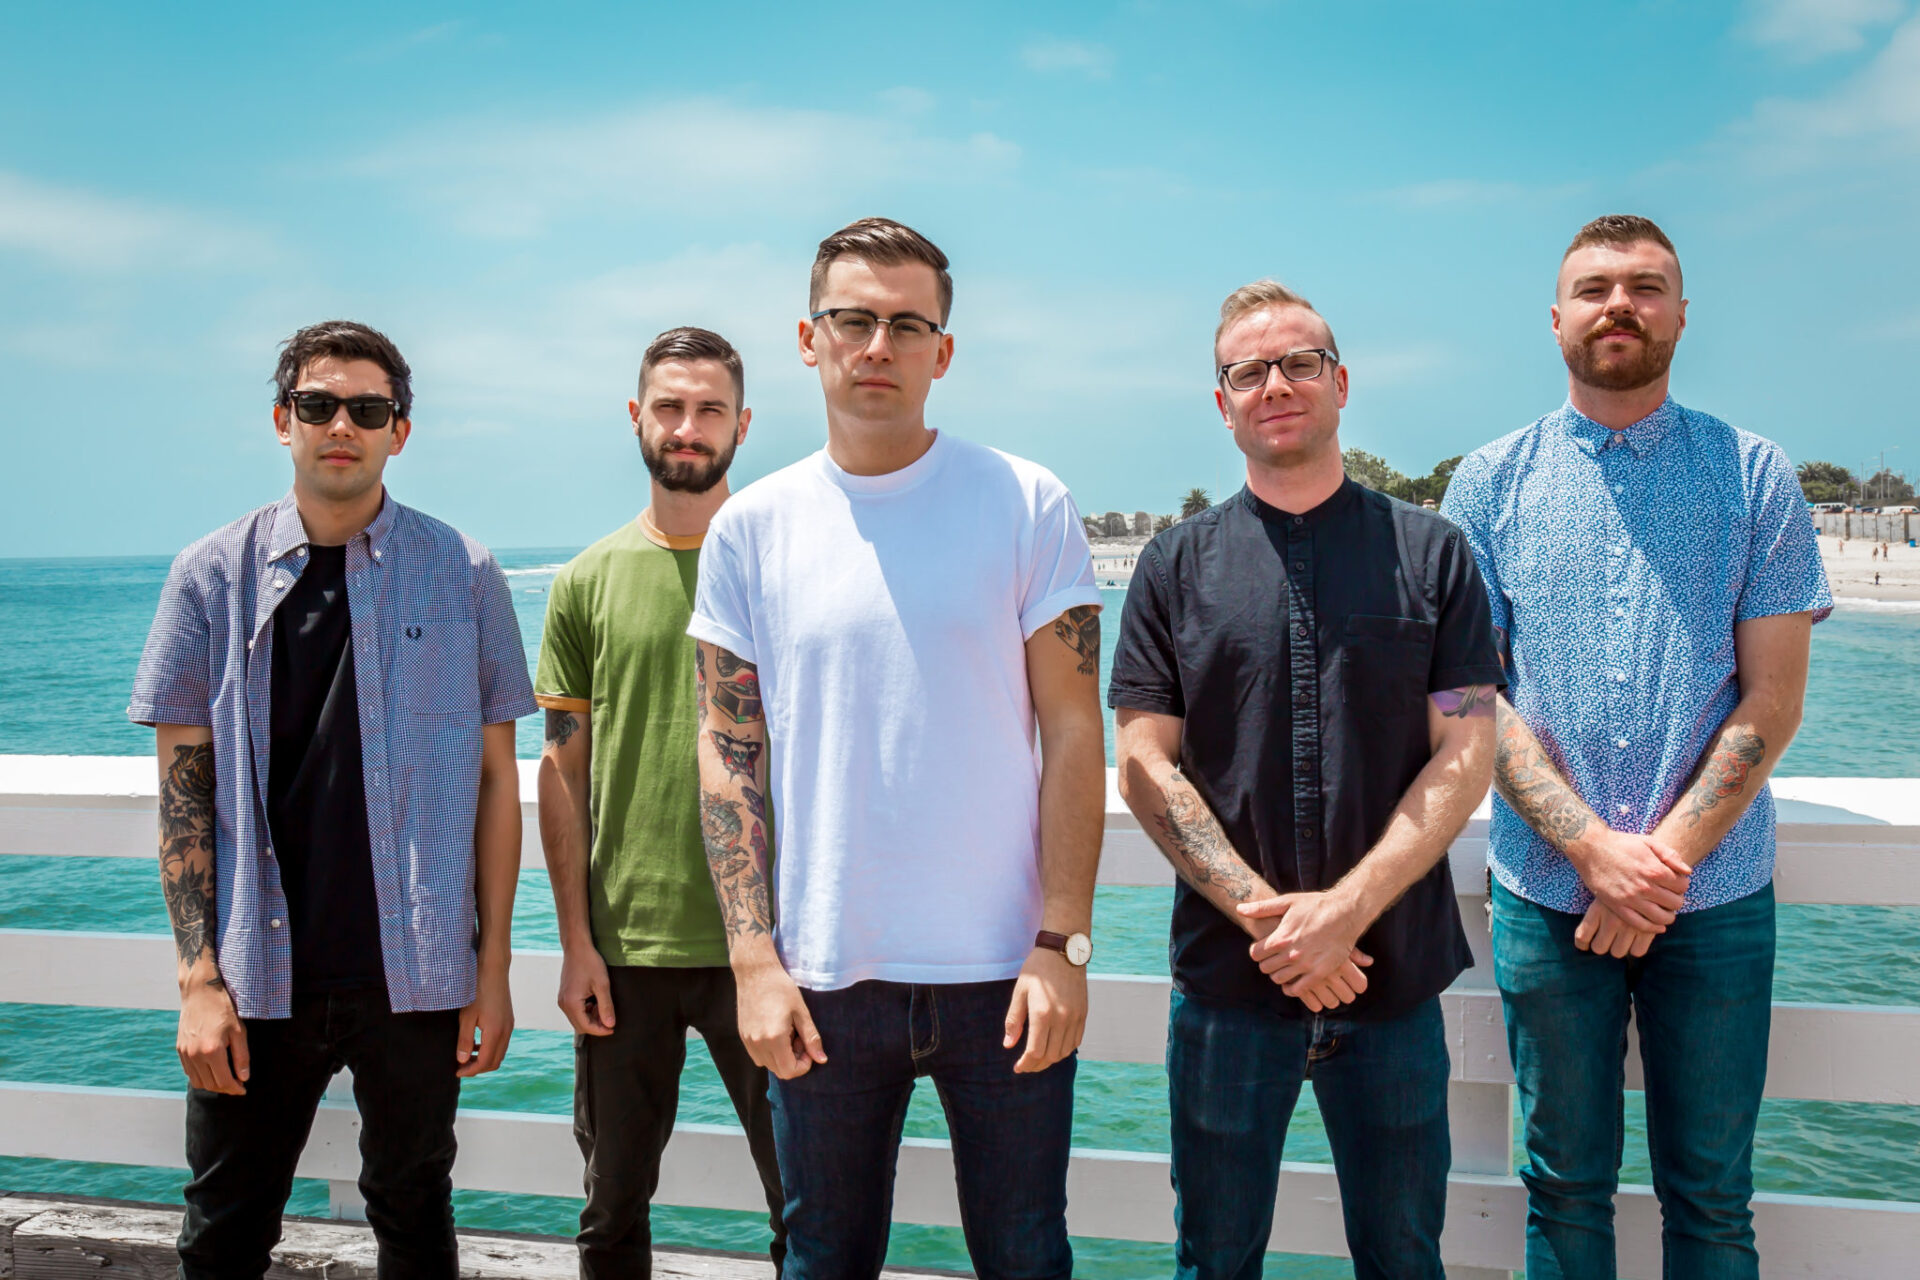 Trophy Eyes, Seaway announce co-headlining ‘American Vacation’ tour